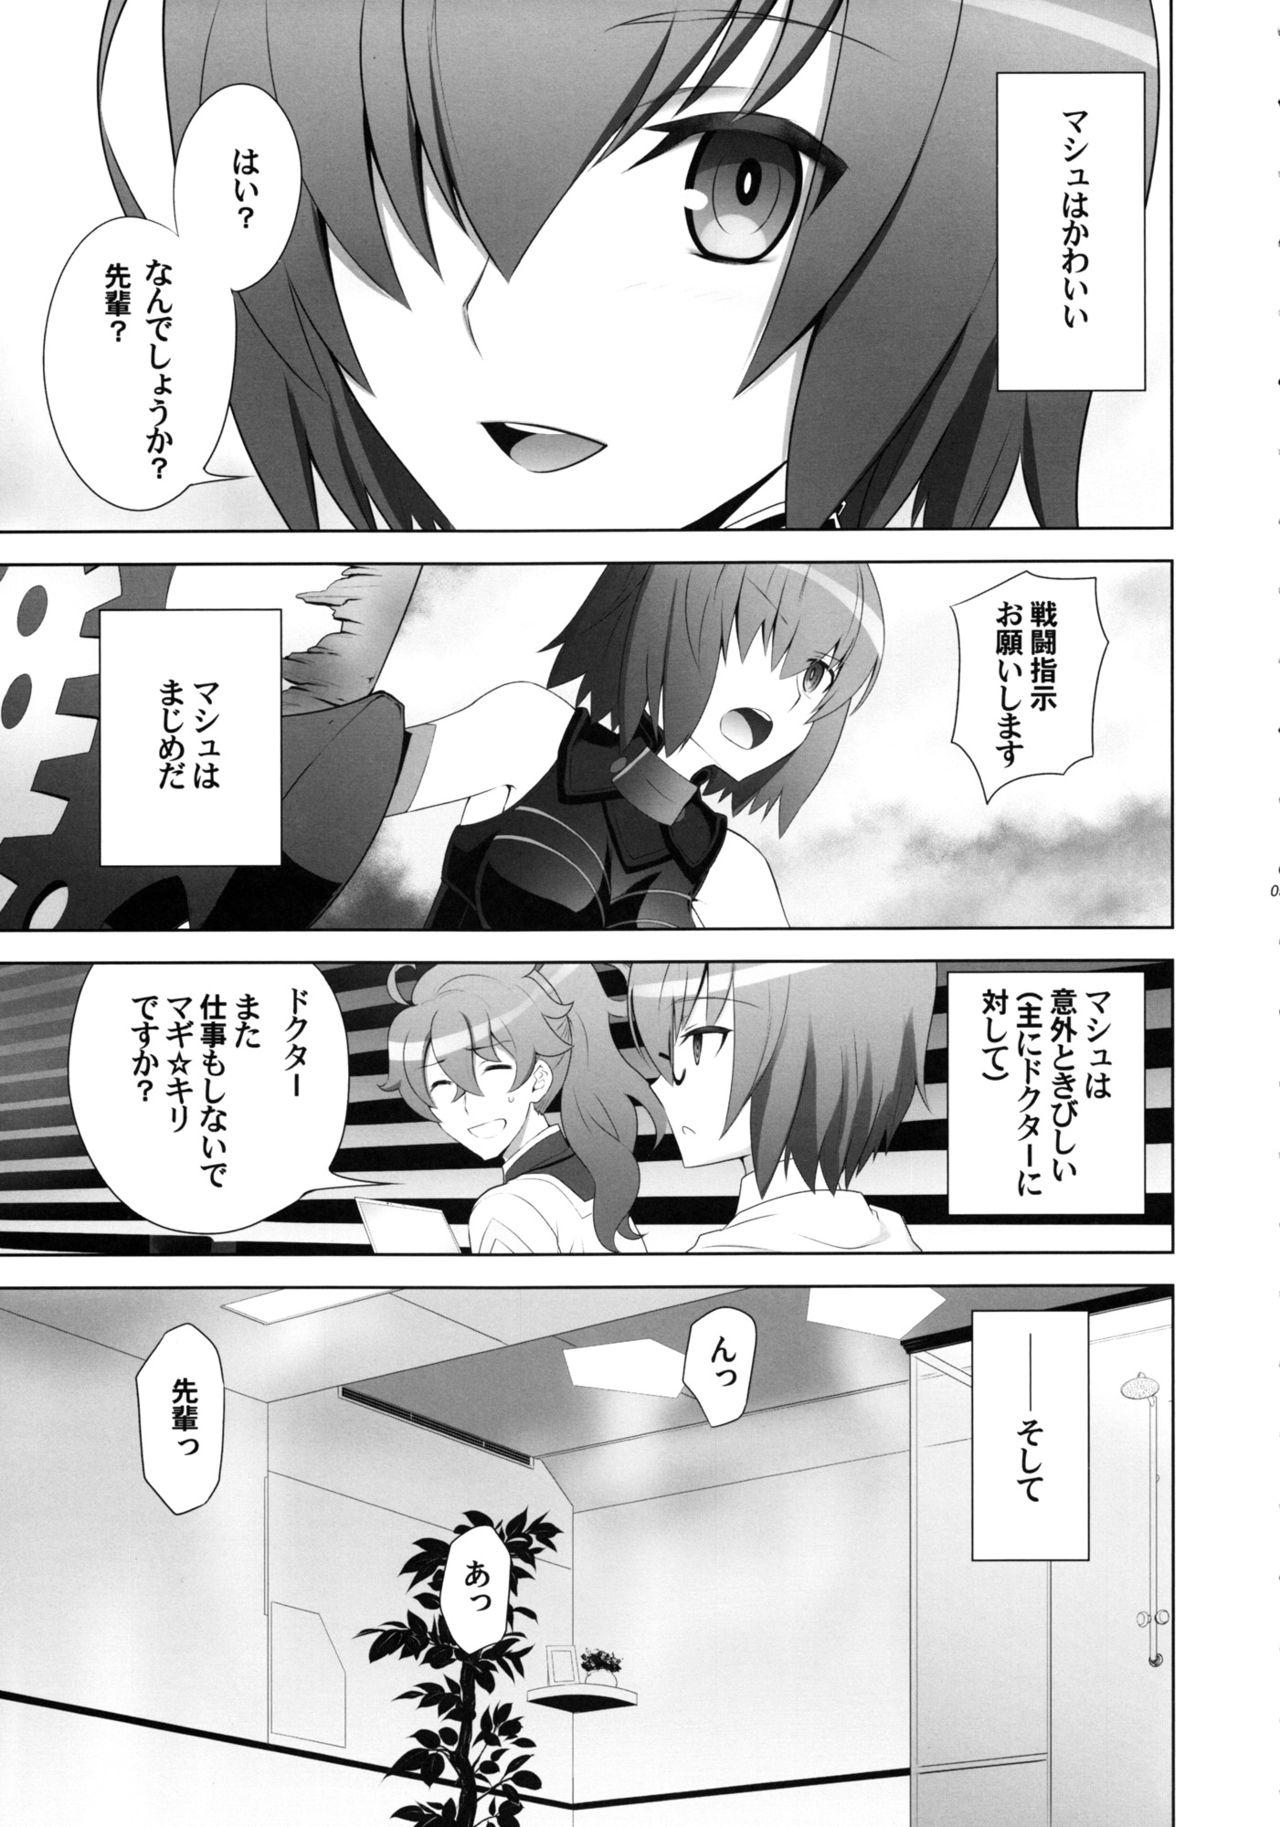 Step T*MOON COMPLEX GO 06 - Fate grand order Long - Page 4